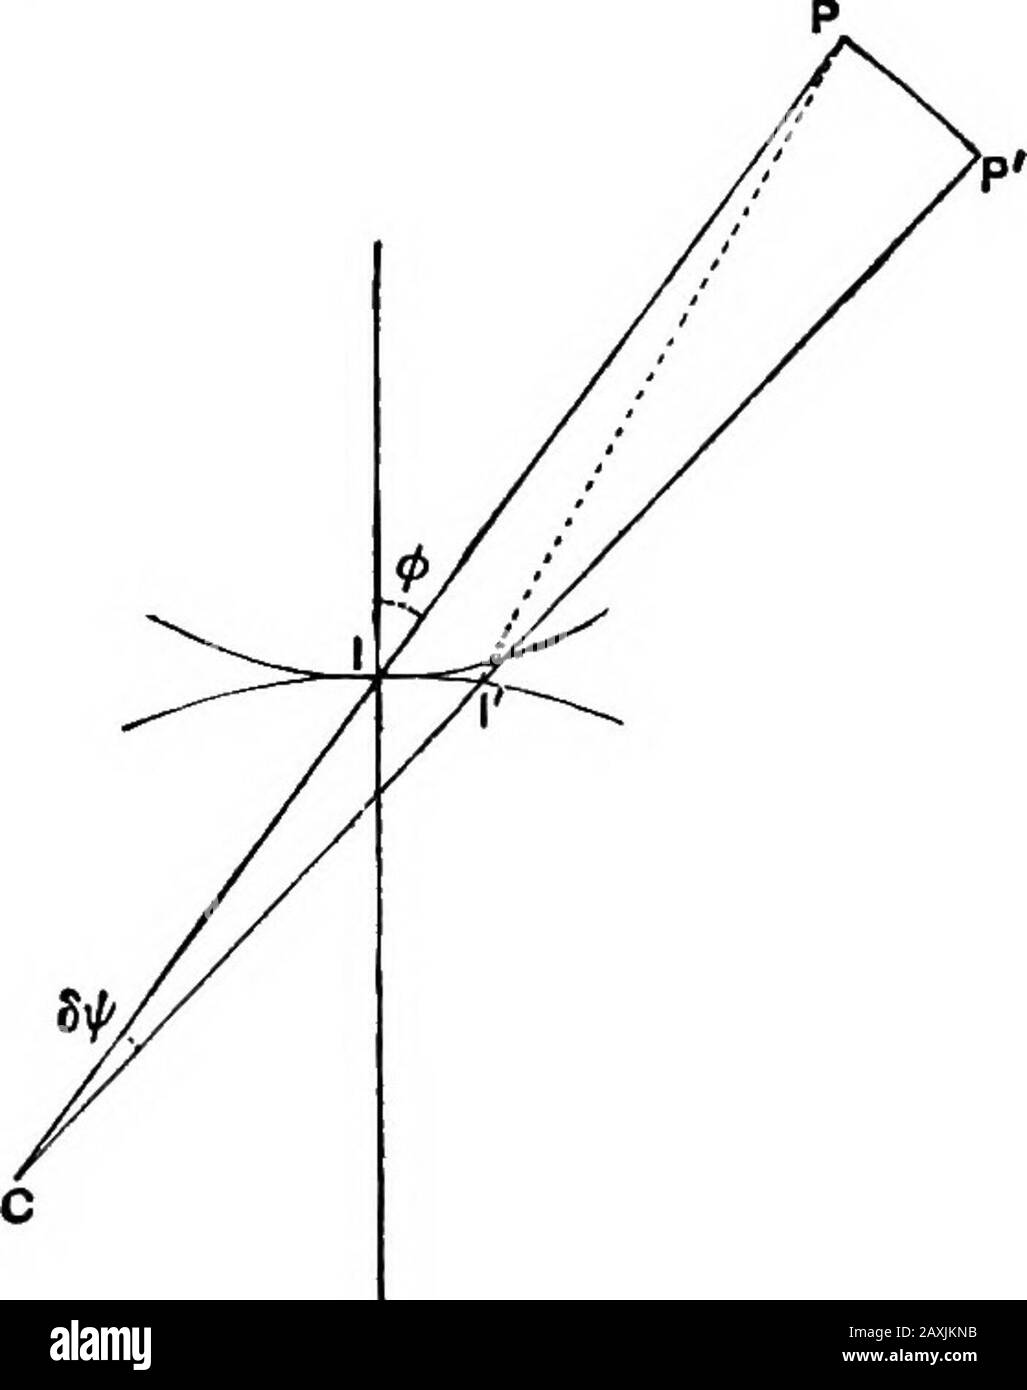 An elementary course of infinitesimal calculus . contact withthe fixed line, and the point Z will move as if it were carried bythe small circle. Its locus is therefore a cycloid. Ex. 2. Similarly if a circle (A) roll on a fixed circle (B), theenvelope of any diameter of A is an epi- or hypo-cycloid whichwould be generated by the rolling of a circle of half the size of Aon the circumference of B. 165. Curvature of a Foint-Roulette. To investigate the curvature of any point P fixedrelatively to the rolling curve, let / be the point of contact,and let / be a consecutive point of contact, P the co Stock Photo